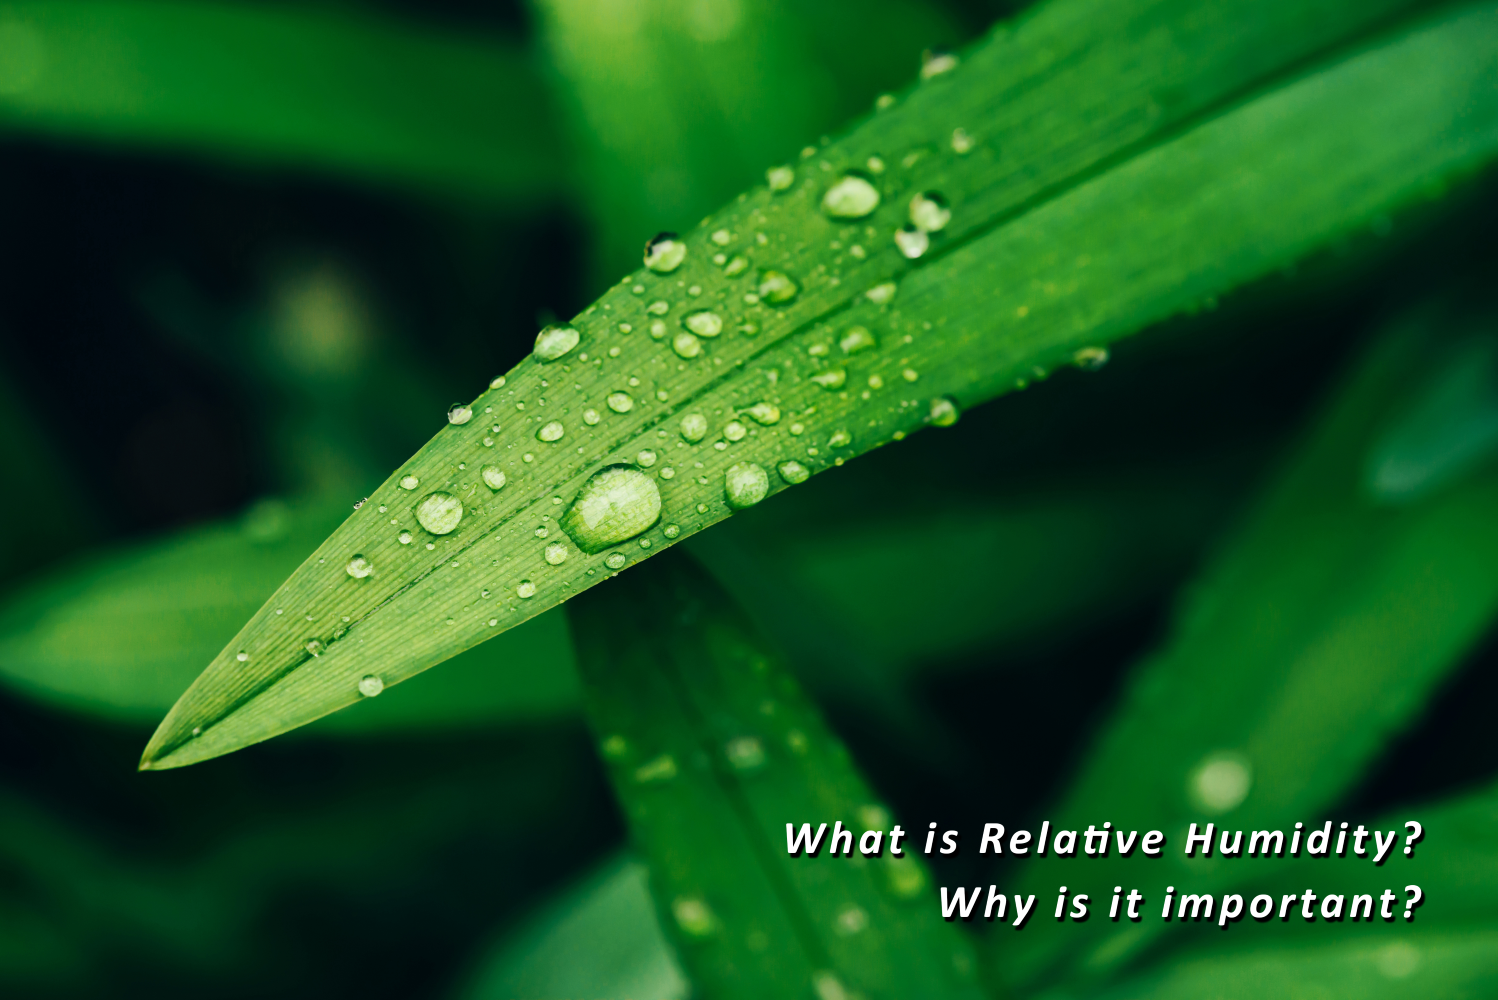 What is Relative Humidity and Why do we need to measure?